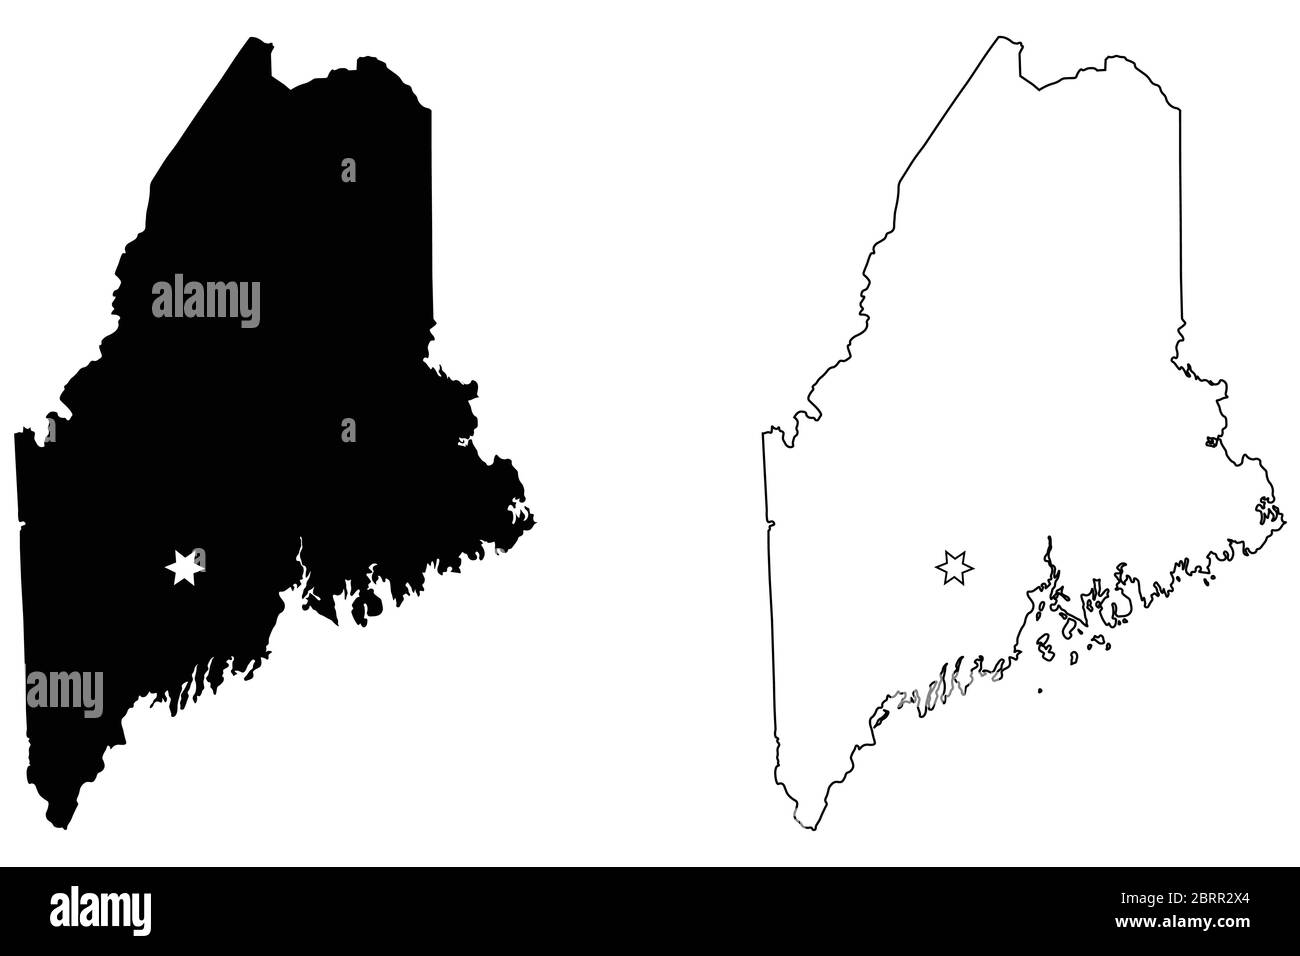 Maine ME state Map USA with Capital City Star at Augusta. Black silhouette and outline isolated on a white background. EPS Vector Stock Vector